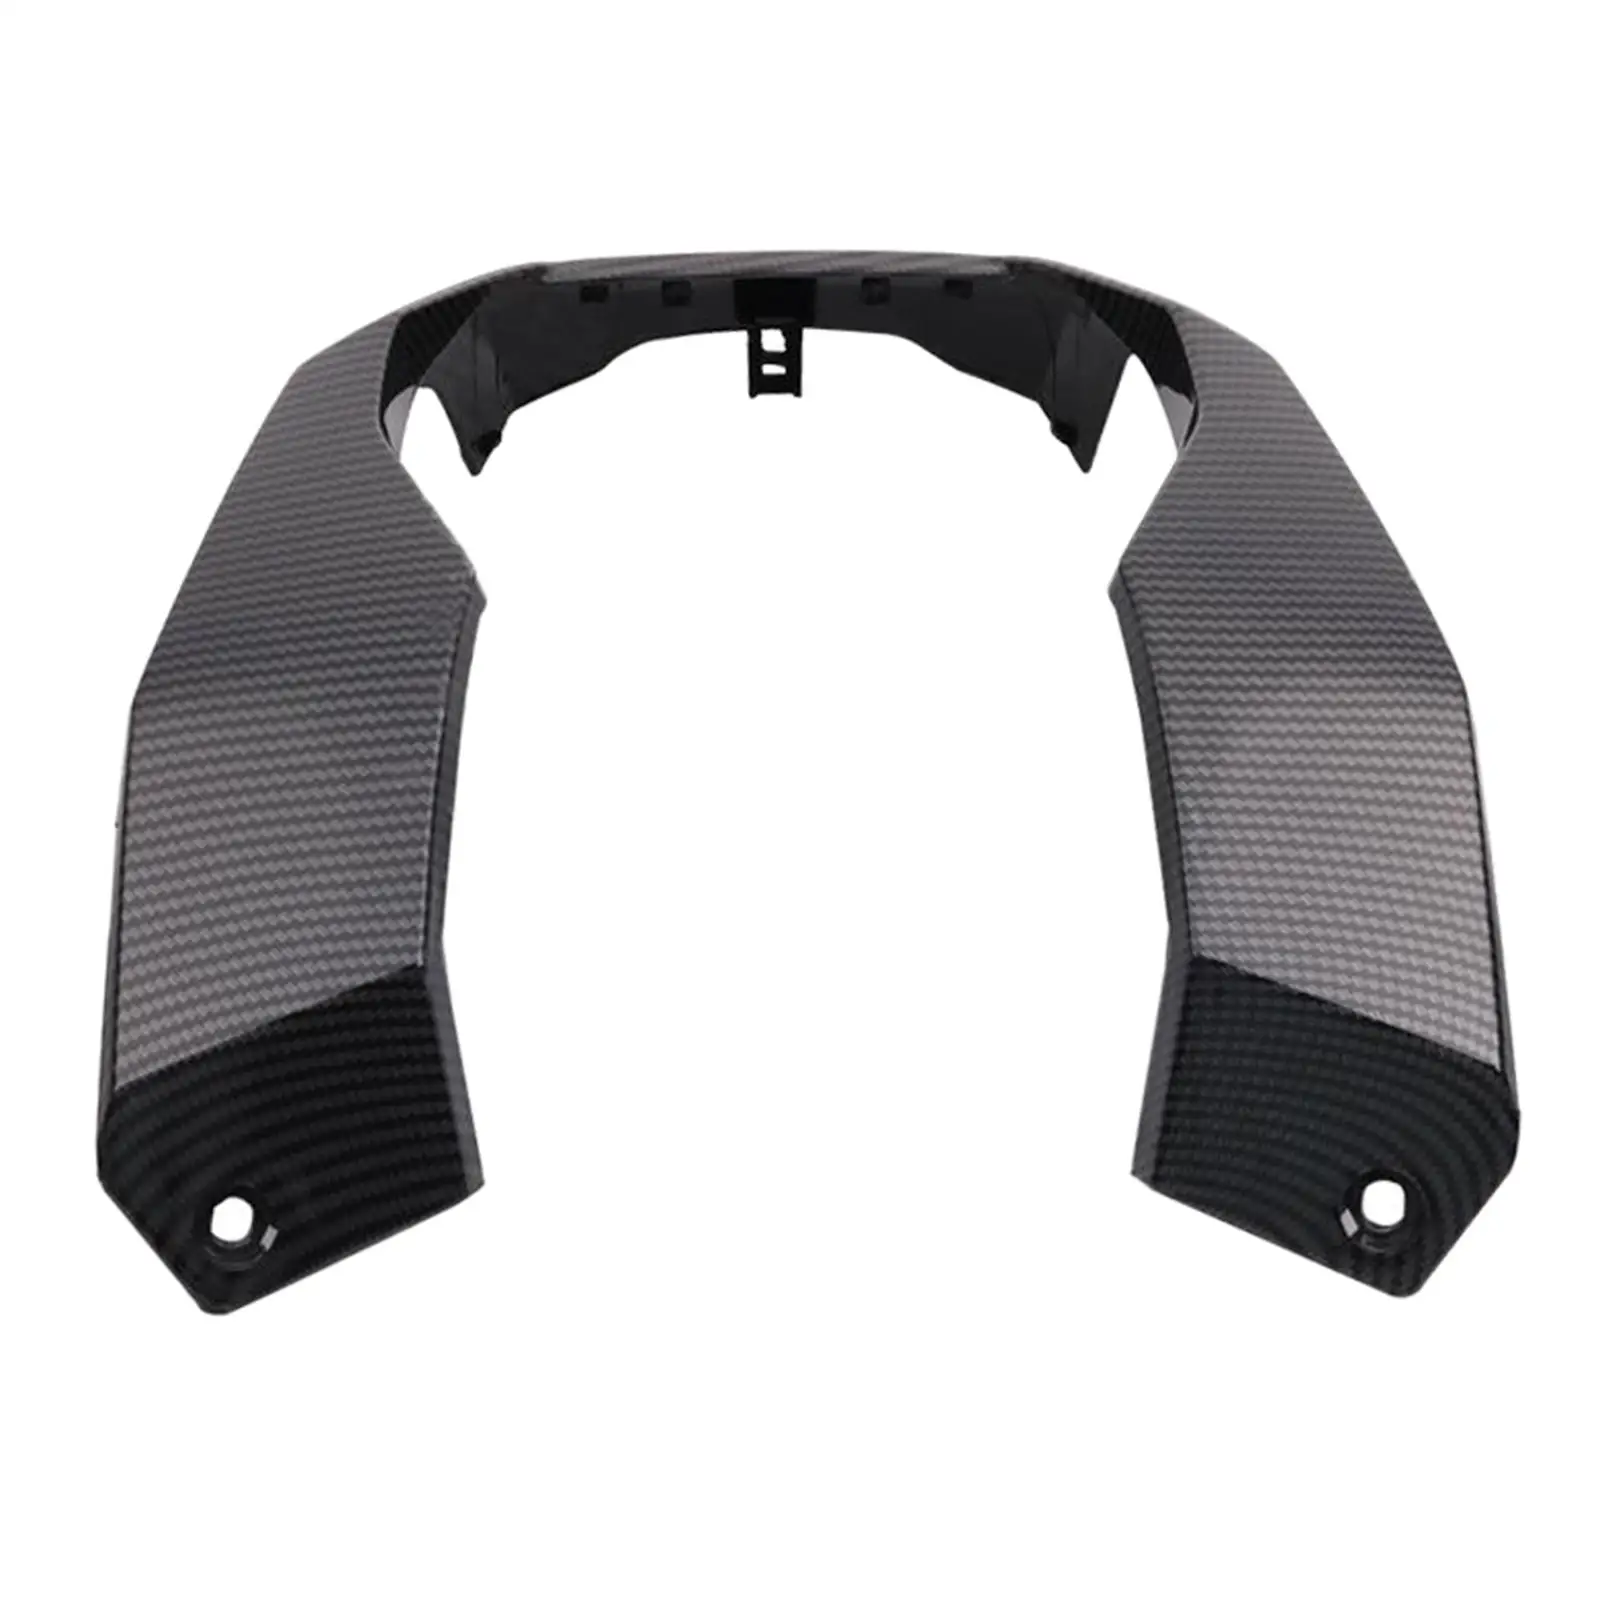 

Motorcycle Carbon Fiber Texture Front Head Protective Covers Decorative Frame Guards for Honda ADV150 ADV 150